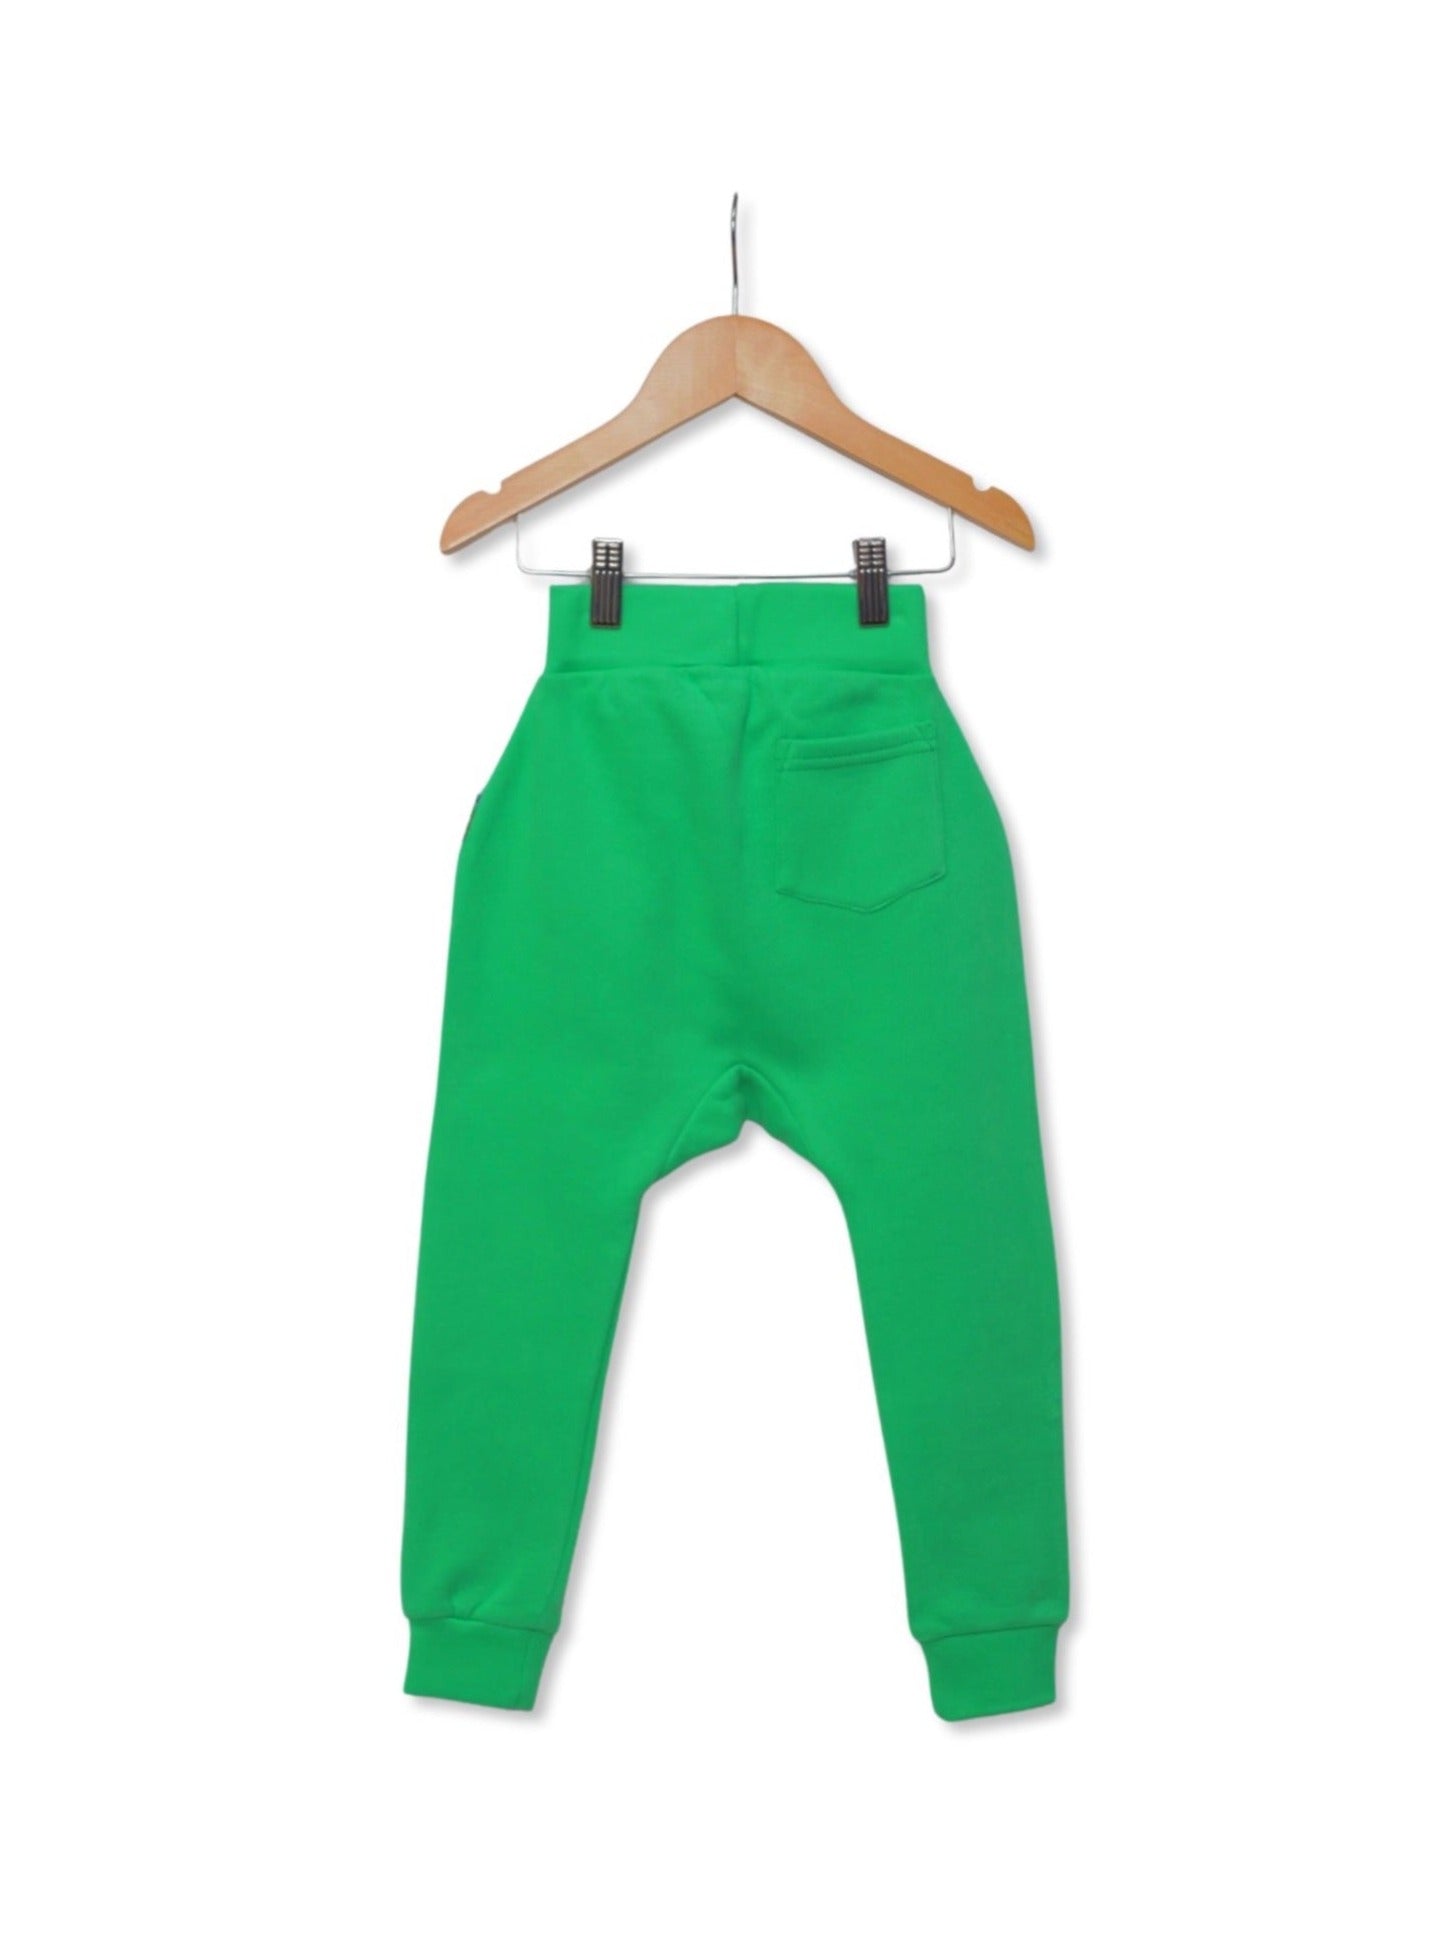 Green Unisex Kids Joggers Back View - Hues Clothing